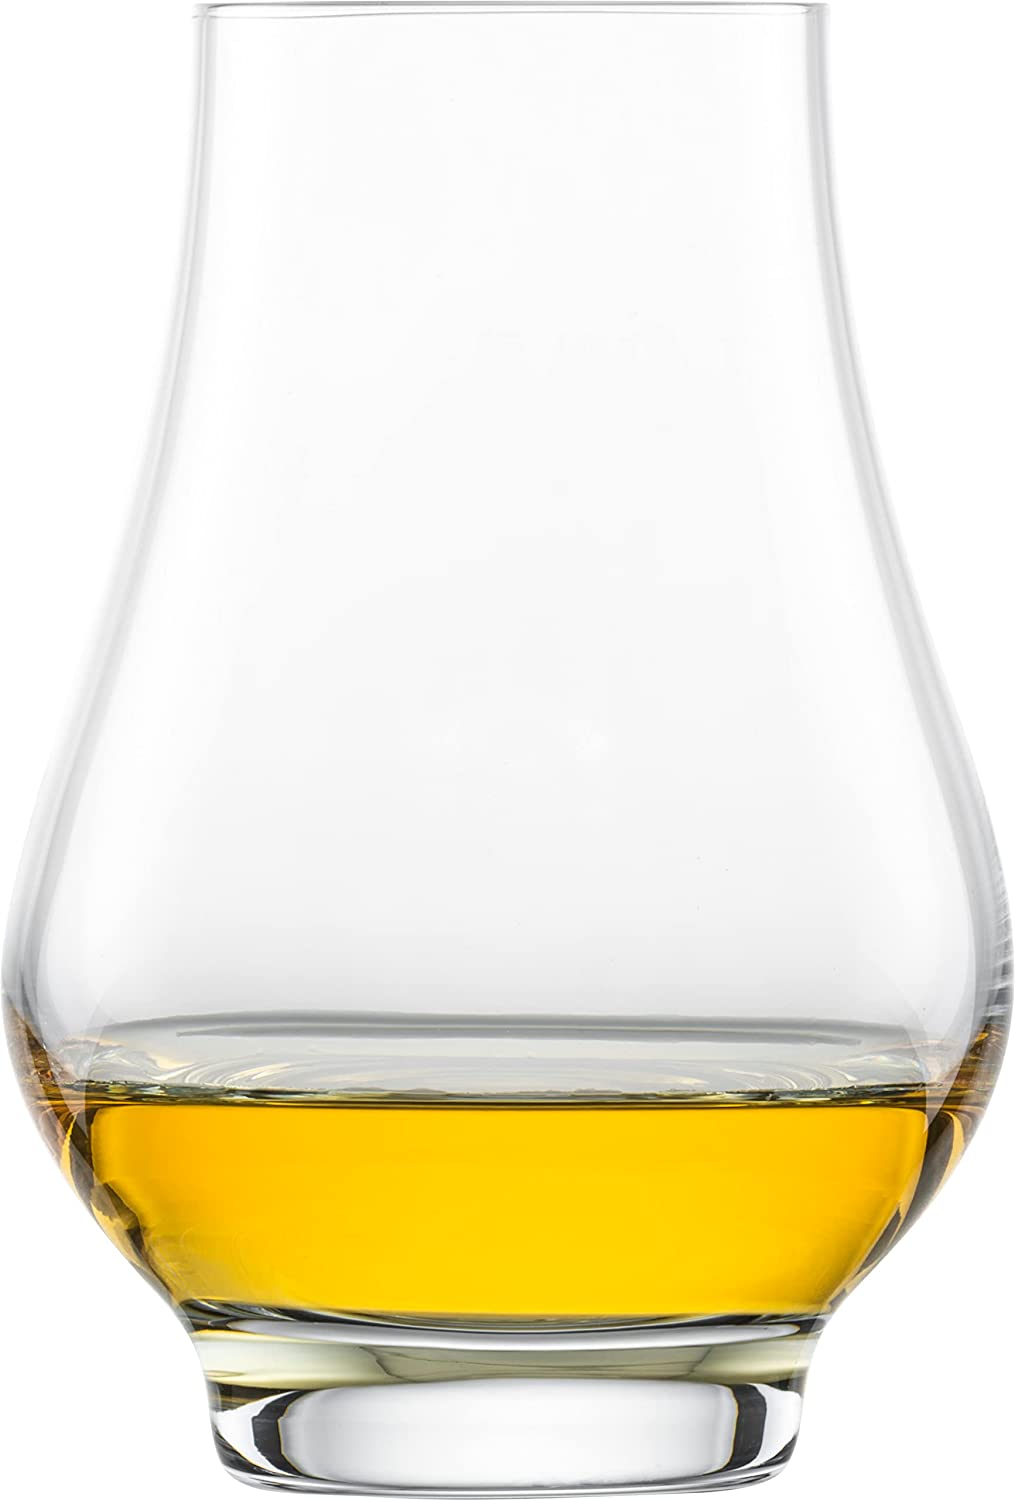 Schott Zwiesel 130000 Whisky Nosing Tumbler Bar Special Glasses Set of 4 Glass in Crystal Colour 8.3 cm x 8.3 cm x 12 cm